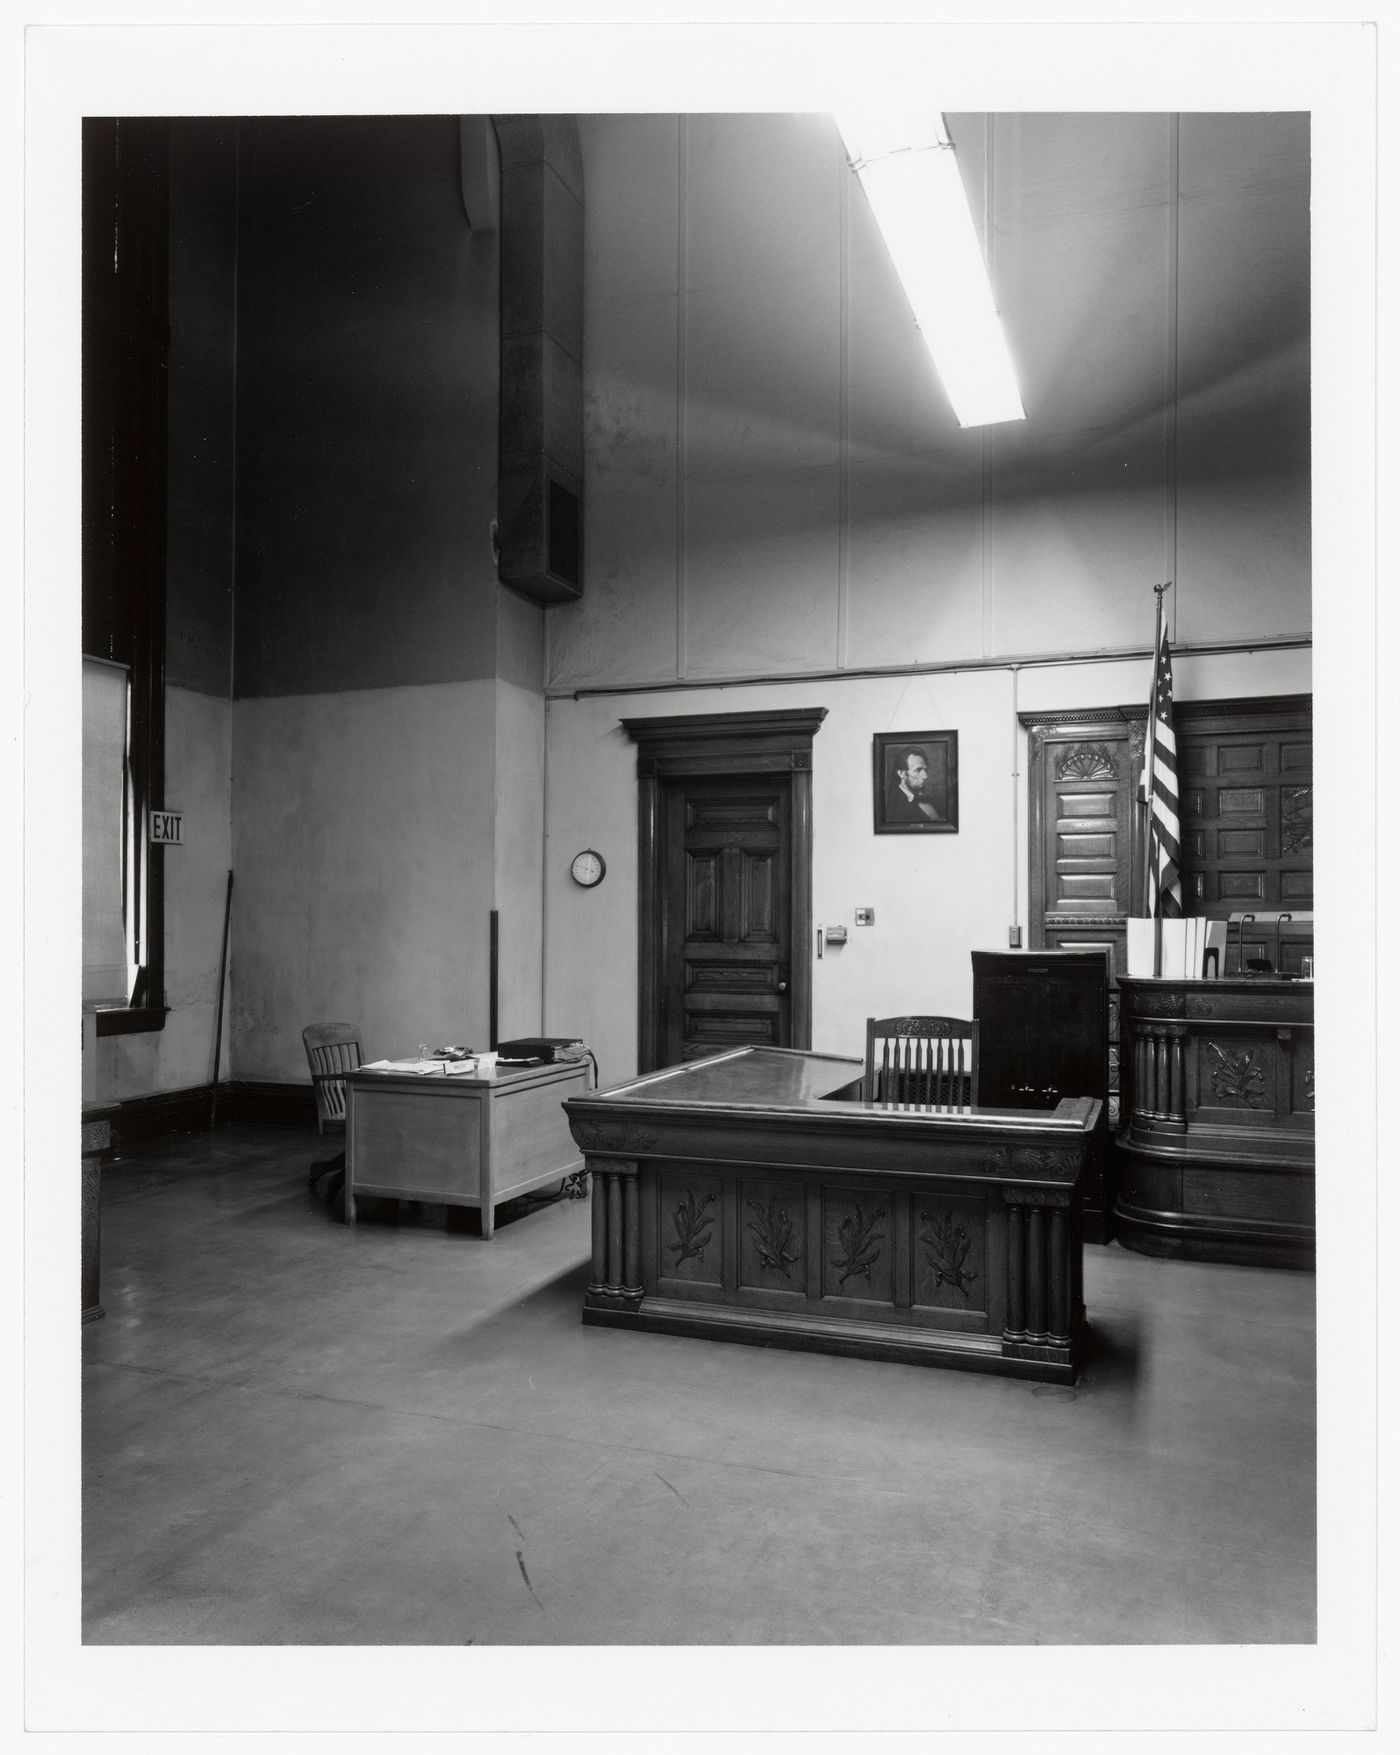 Interior view of the courtroom of the Dubuque County Courthouse, Dubuque, Iowa, United States